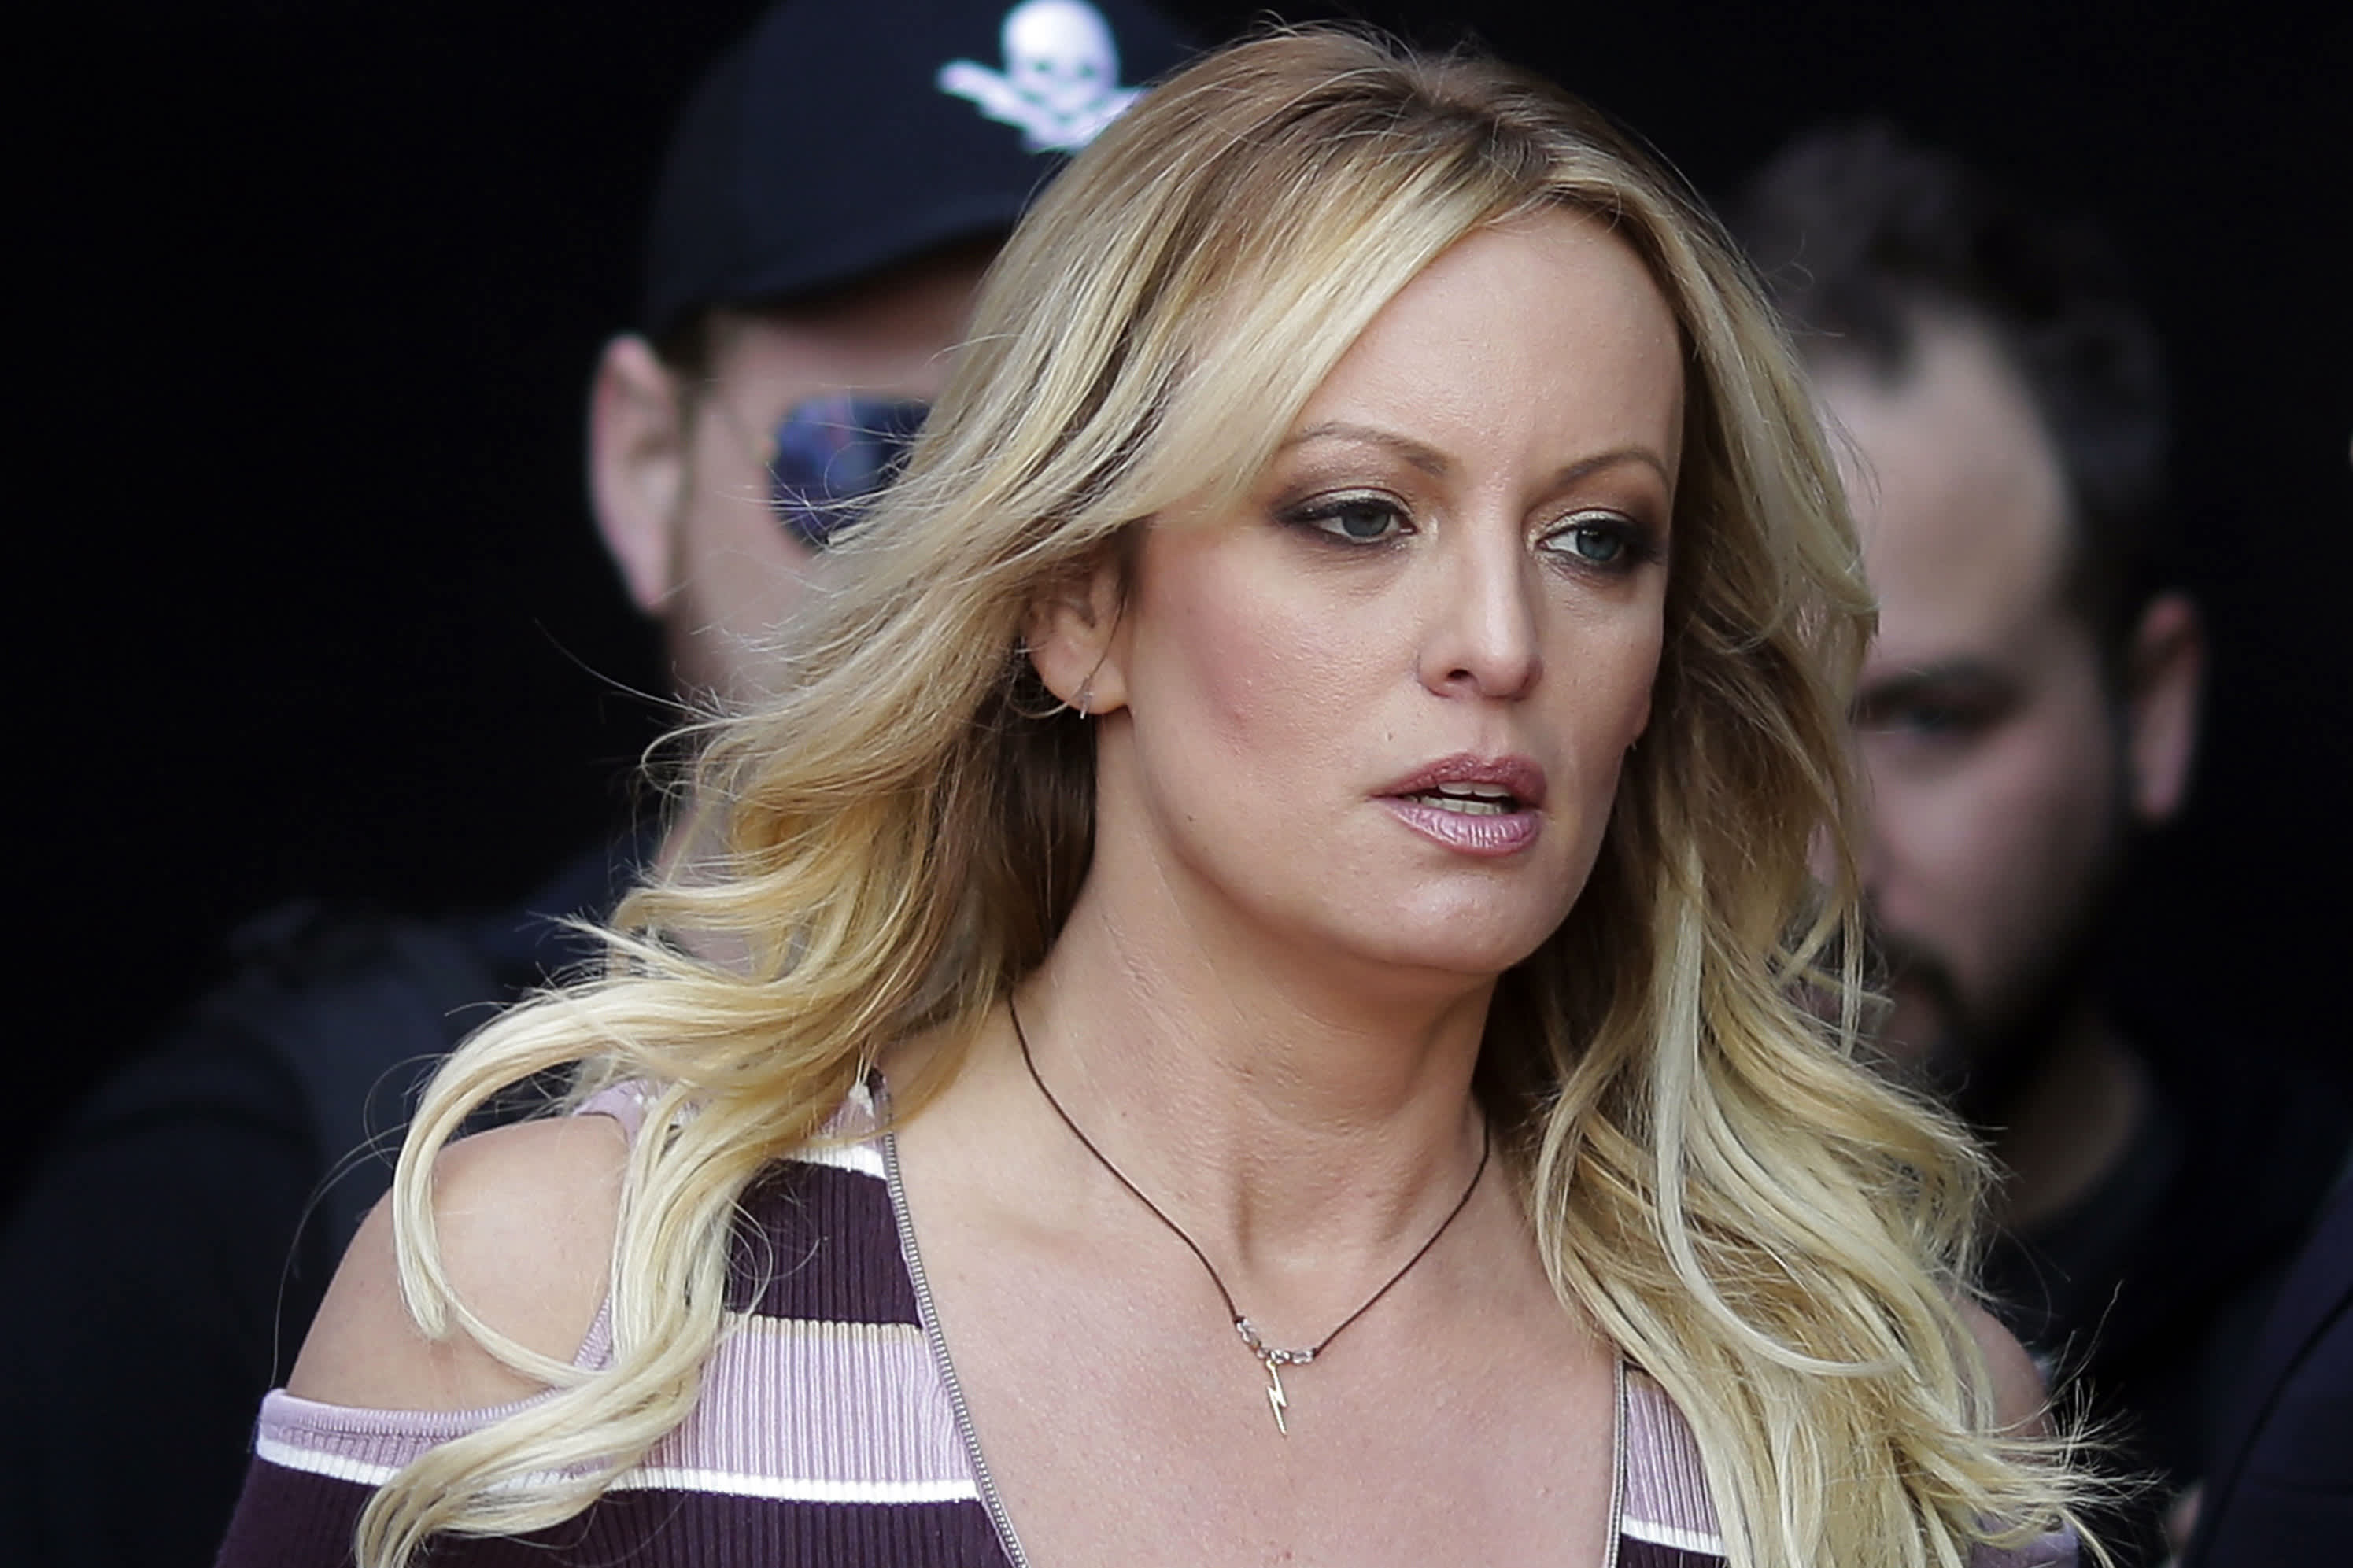 Porn Star Stormy Daniels Says She’ll ‘Dance Down the Street’ If Trump Goes to Jail – NBC New York